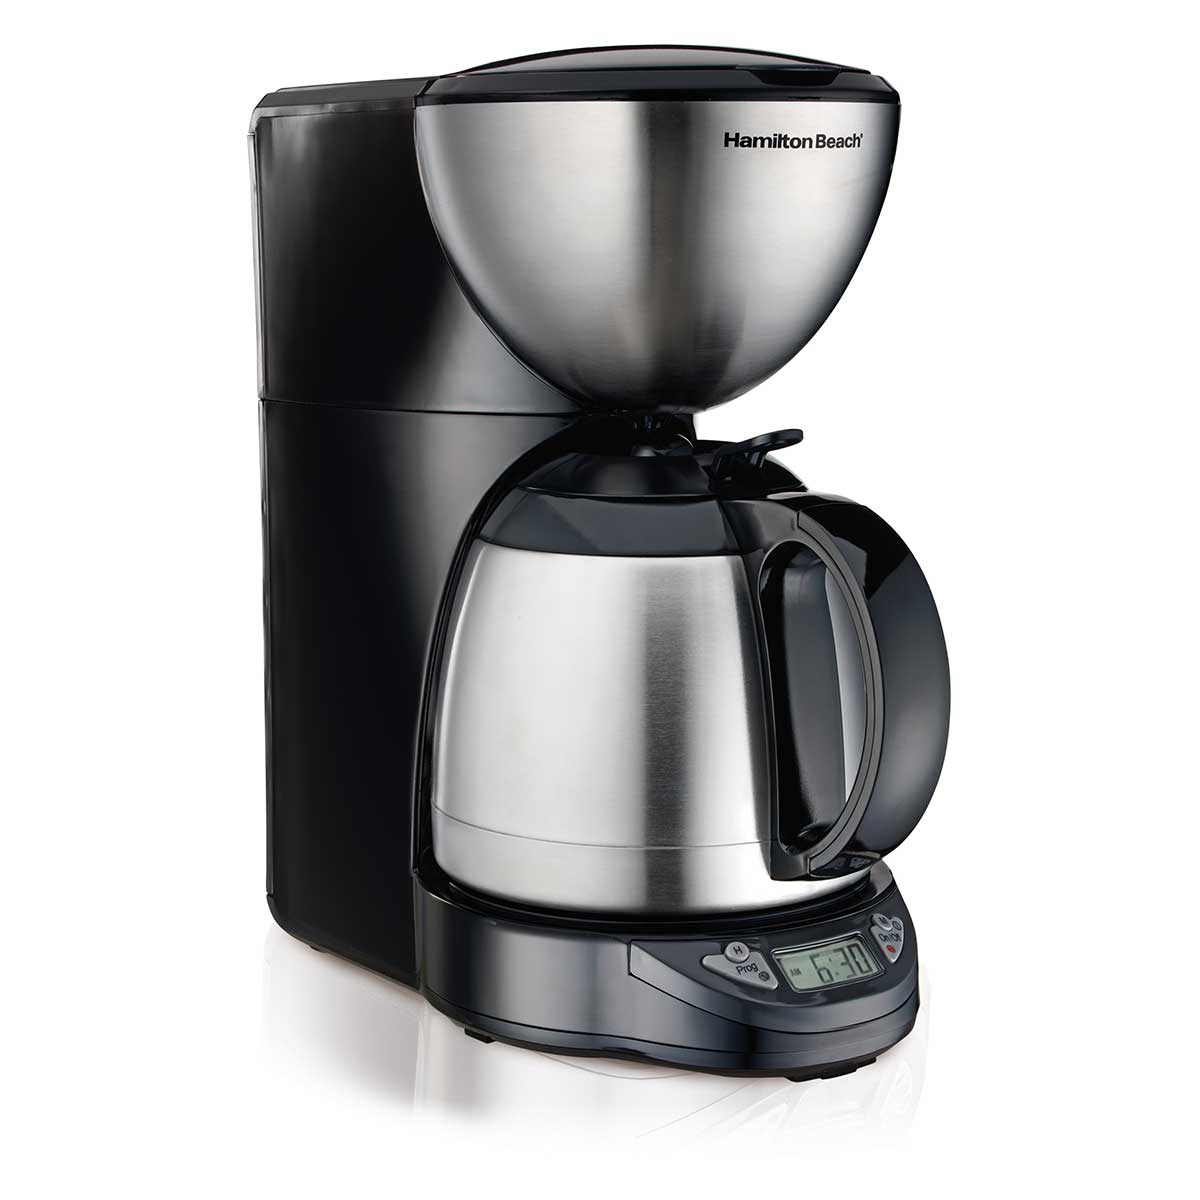 10-Cup Programmable Coffee Maker with Thermal Carafe, Black & Stainless (49855)